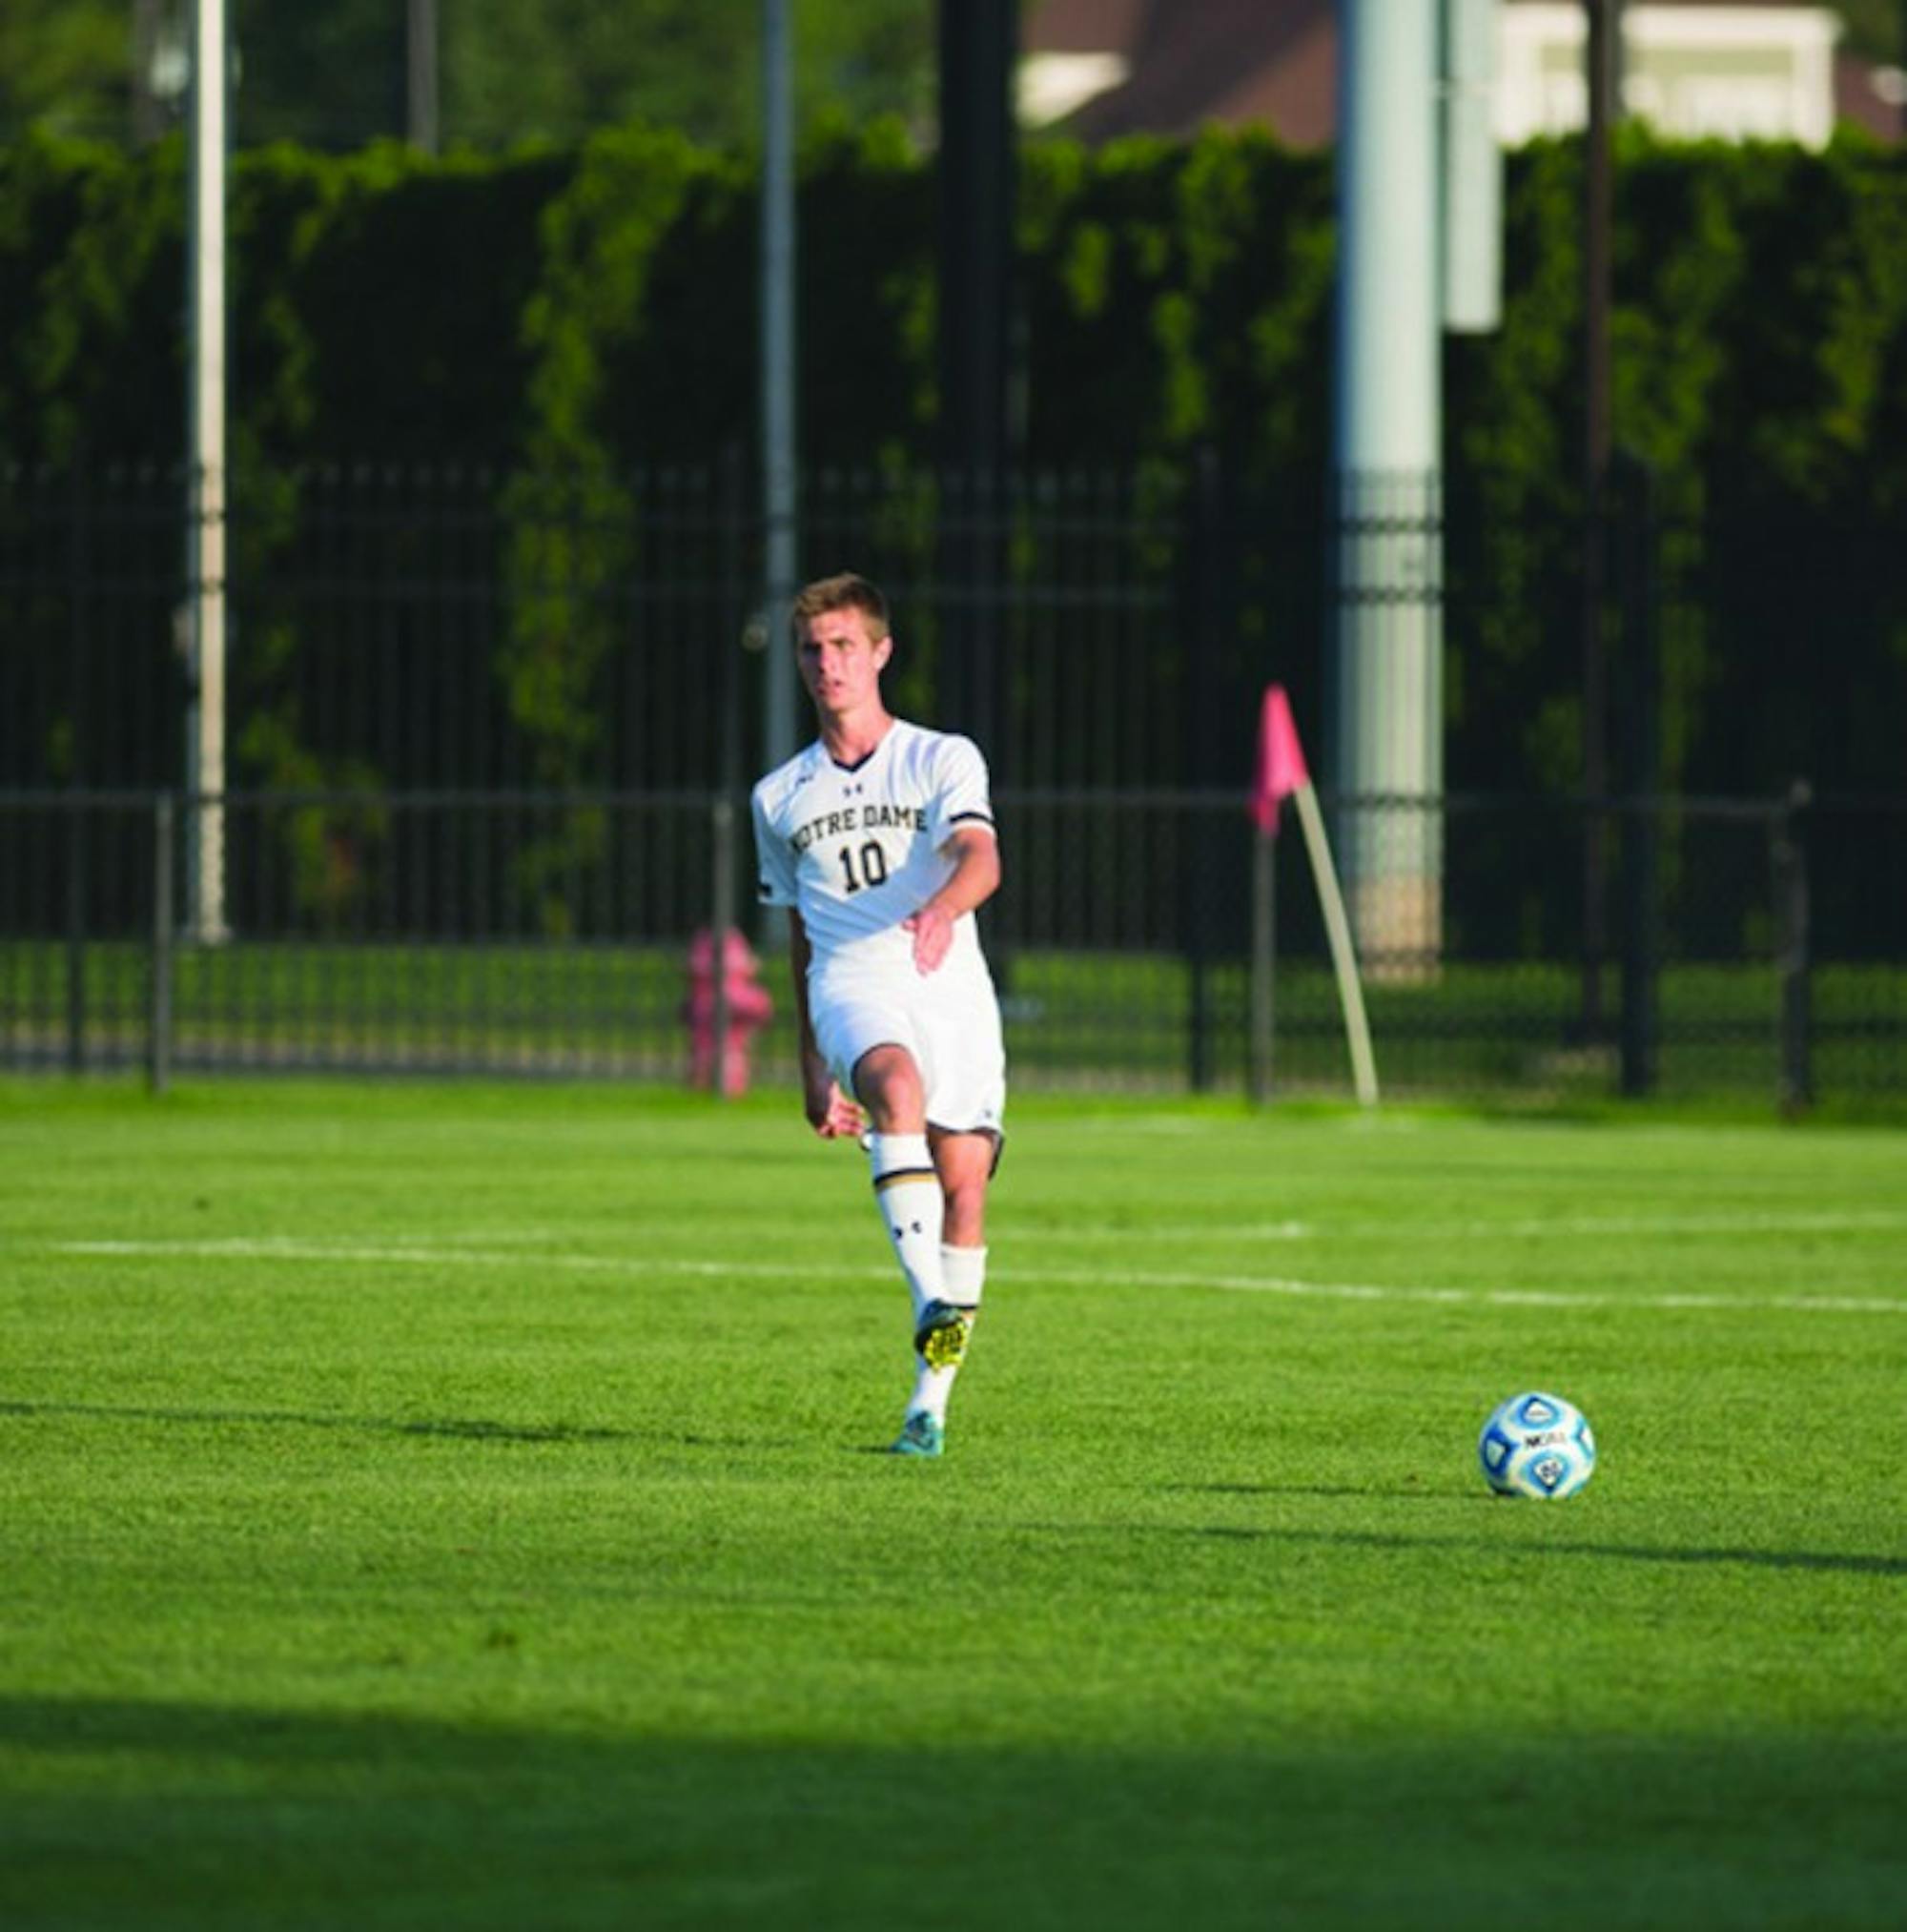 Irish sophomore defender Brandon Aubrey sends a pass in a 1-0 loss to Kentucky on Sept. 8. Aubrey has started all five matches for Notre Dame this season and has tallied one goal and three shots.